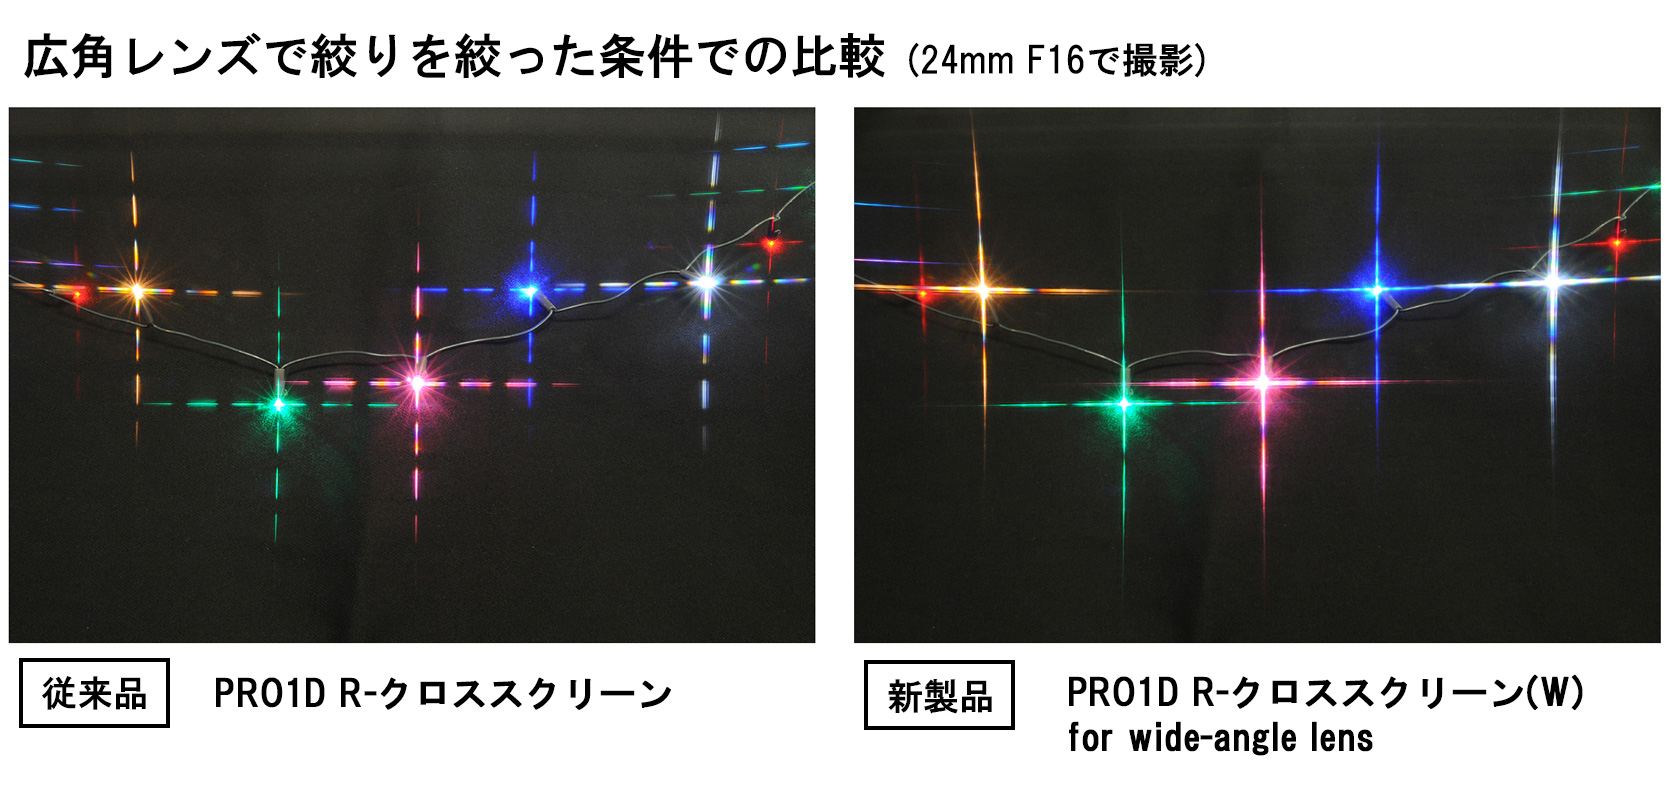 PRO1D R-クロススクリーン(W) for wide-angle lens | ケンコー・トキナー